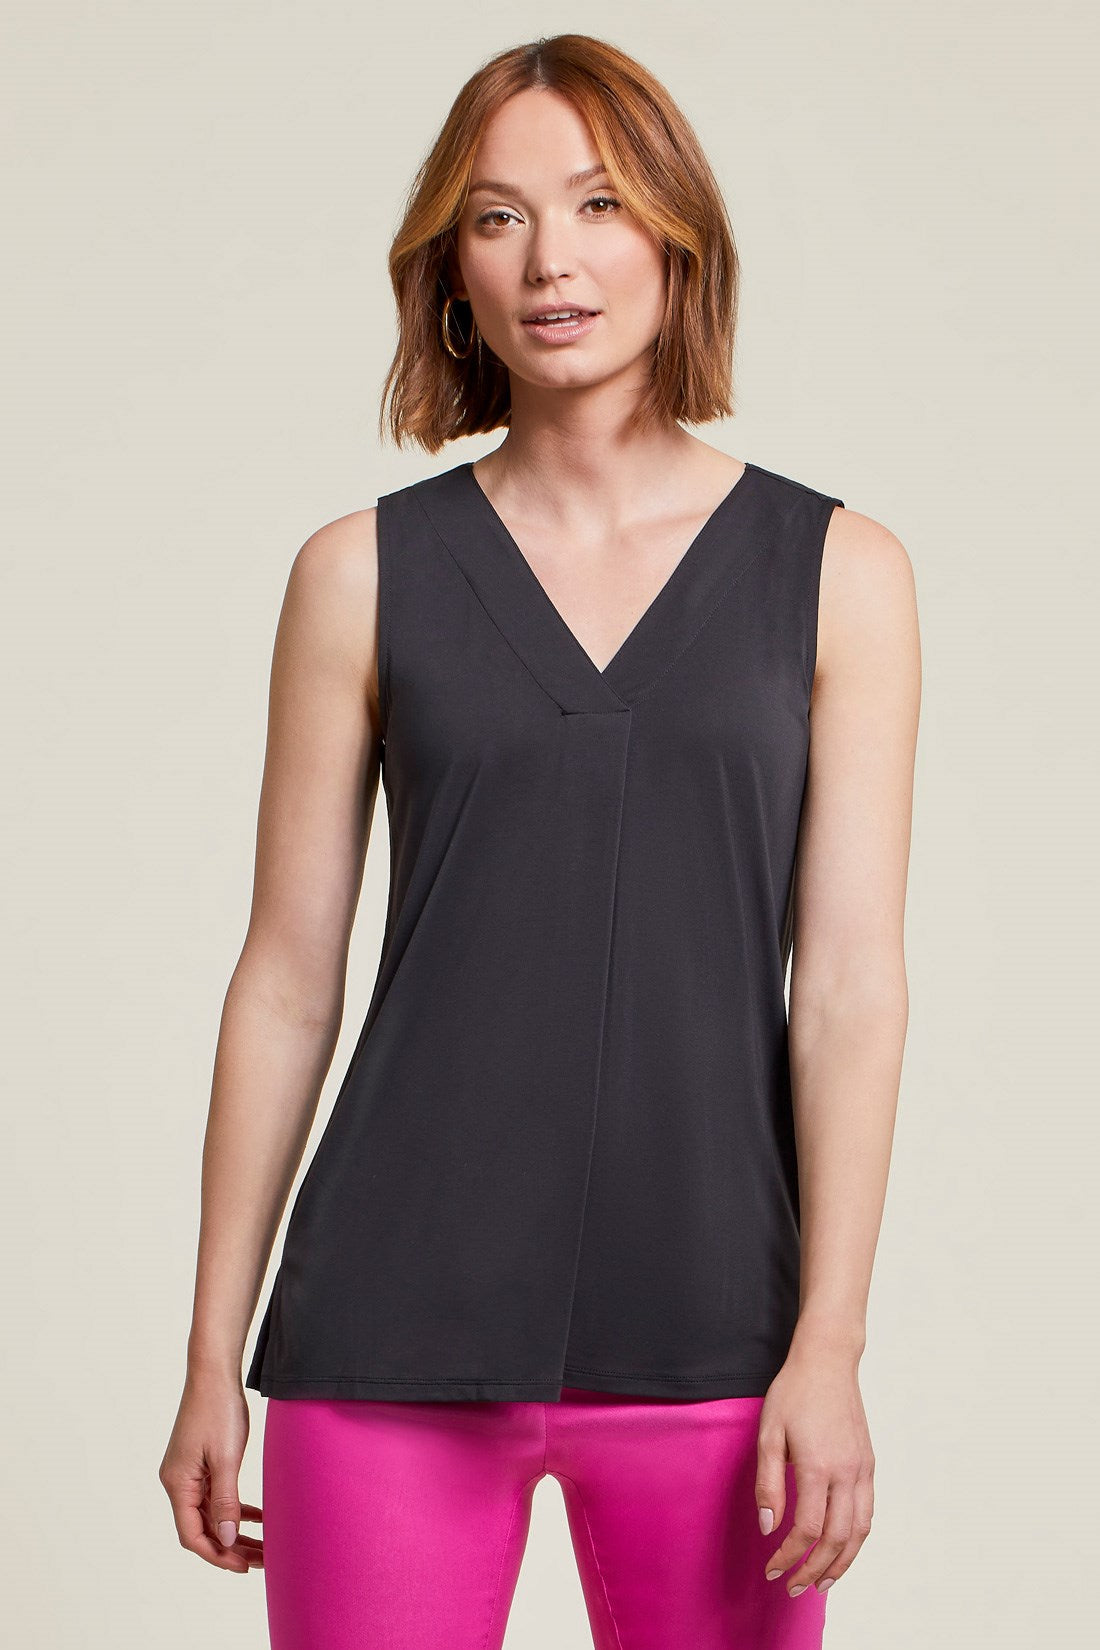 You're not dreaming, you're just wearing this super soft modal-blend top that exudes (almost) unbelievable style and comfort! We're loving the cool sleeveless cut, flowy fit, pop-over v-neck, center front pleat, and side-slit hemline. It elegantly accents and flawlessly matches any bottoms you combine it with.